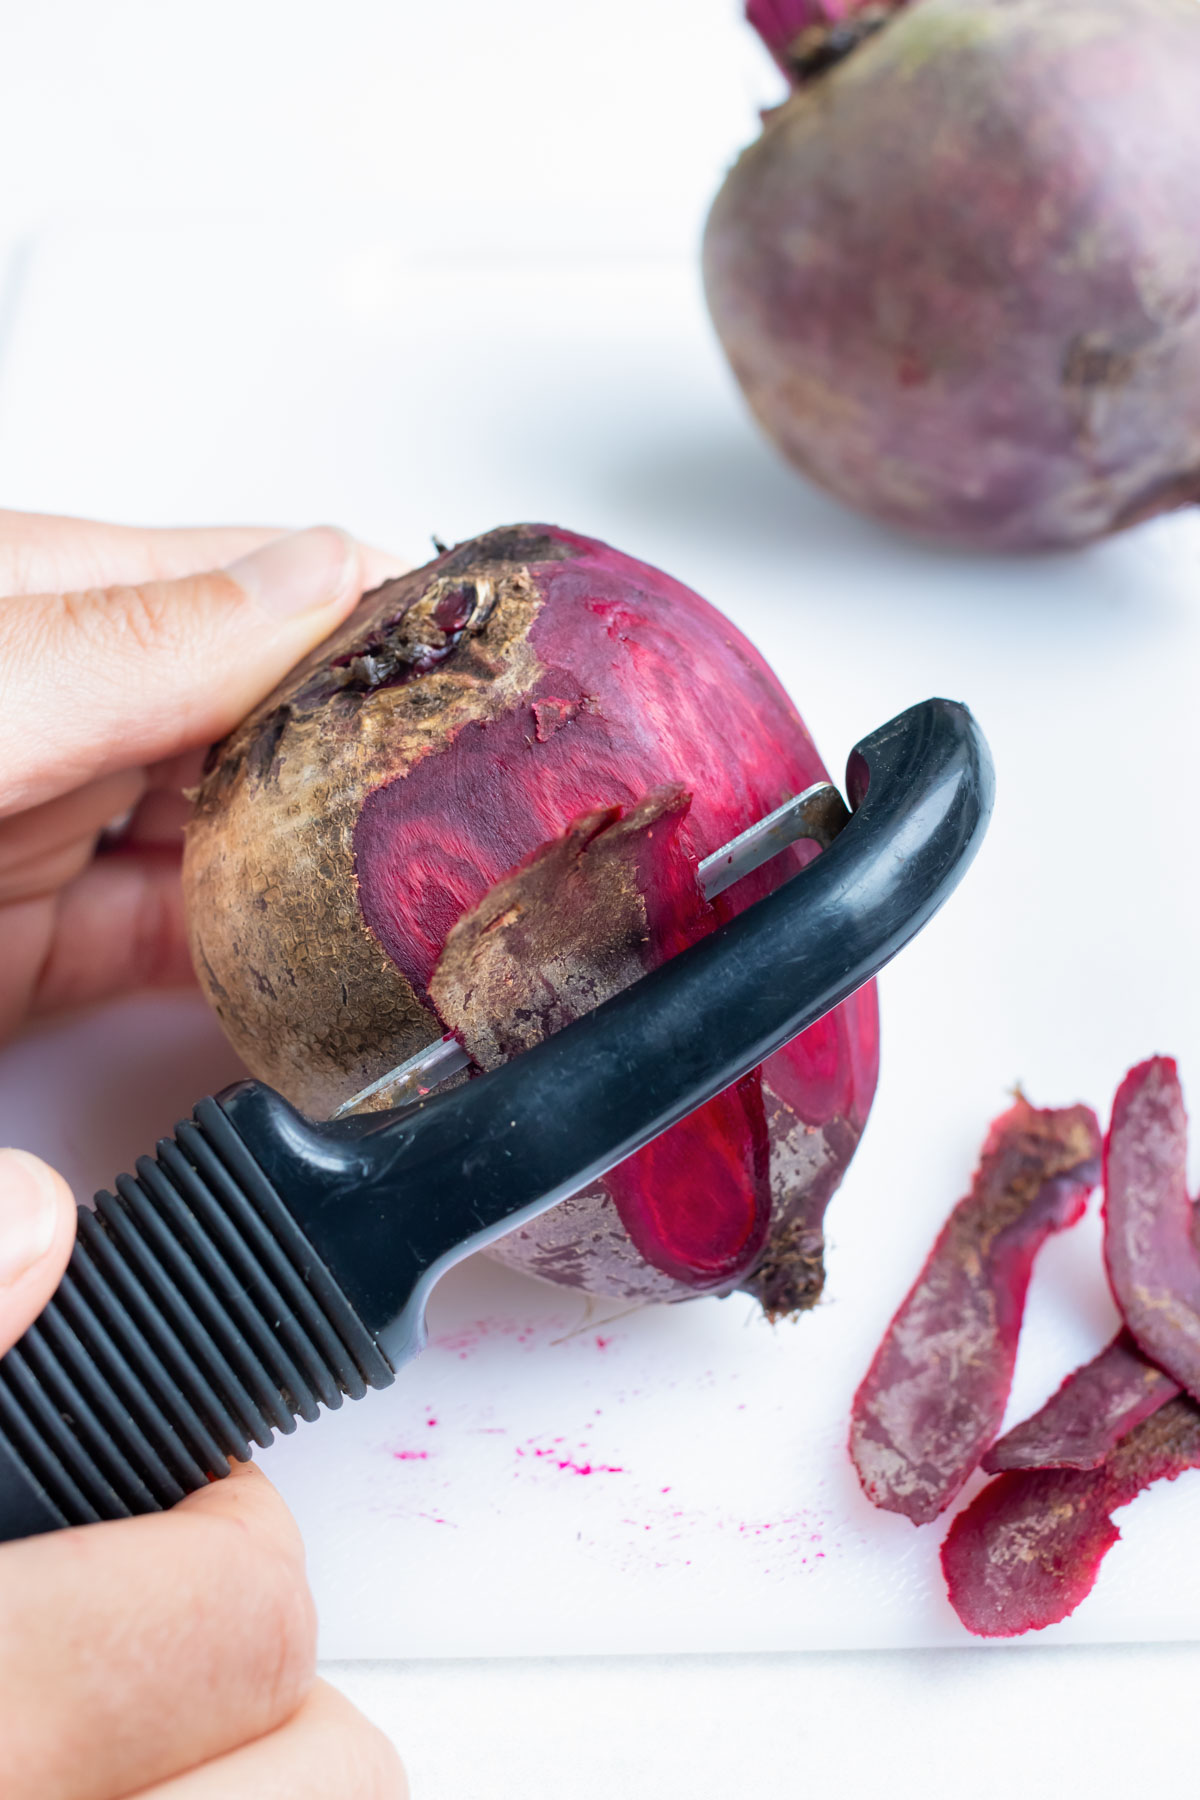 Whole beets are peeled with a vegetable peeler before being roasted.